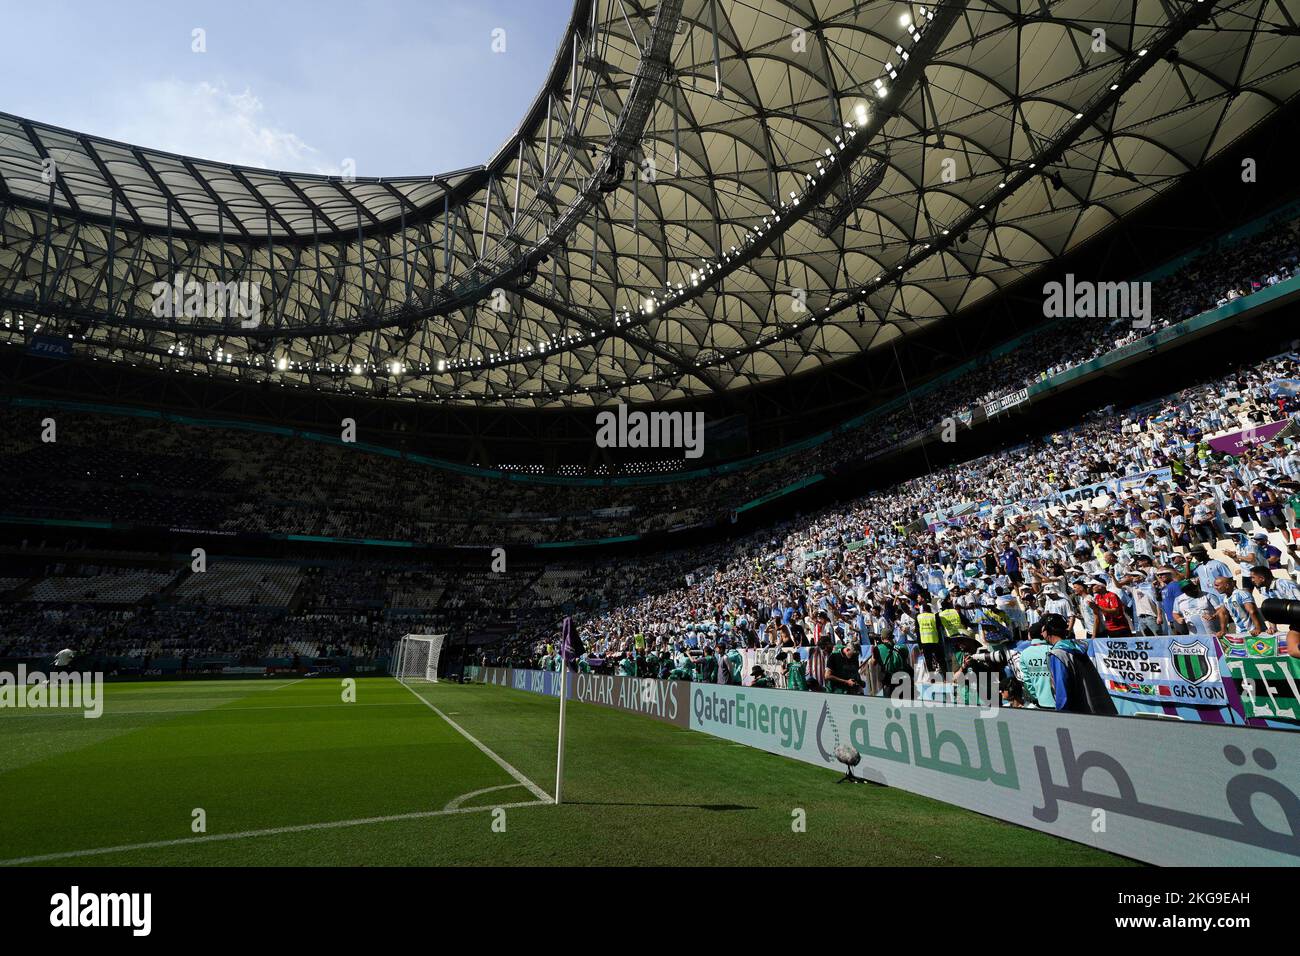 LUSAIL, QATAR - NOVEMBER 22: A general view of stadium pior to the 2022 FIFA World Cup Qatar group C between Argentina and Saudi Arabia at Lusail Stadium on November 22, 2022 in Lusail, Qatar. (Photo by Florencia Tan Jun/PxImages) Stock Photo